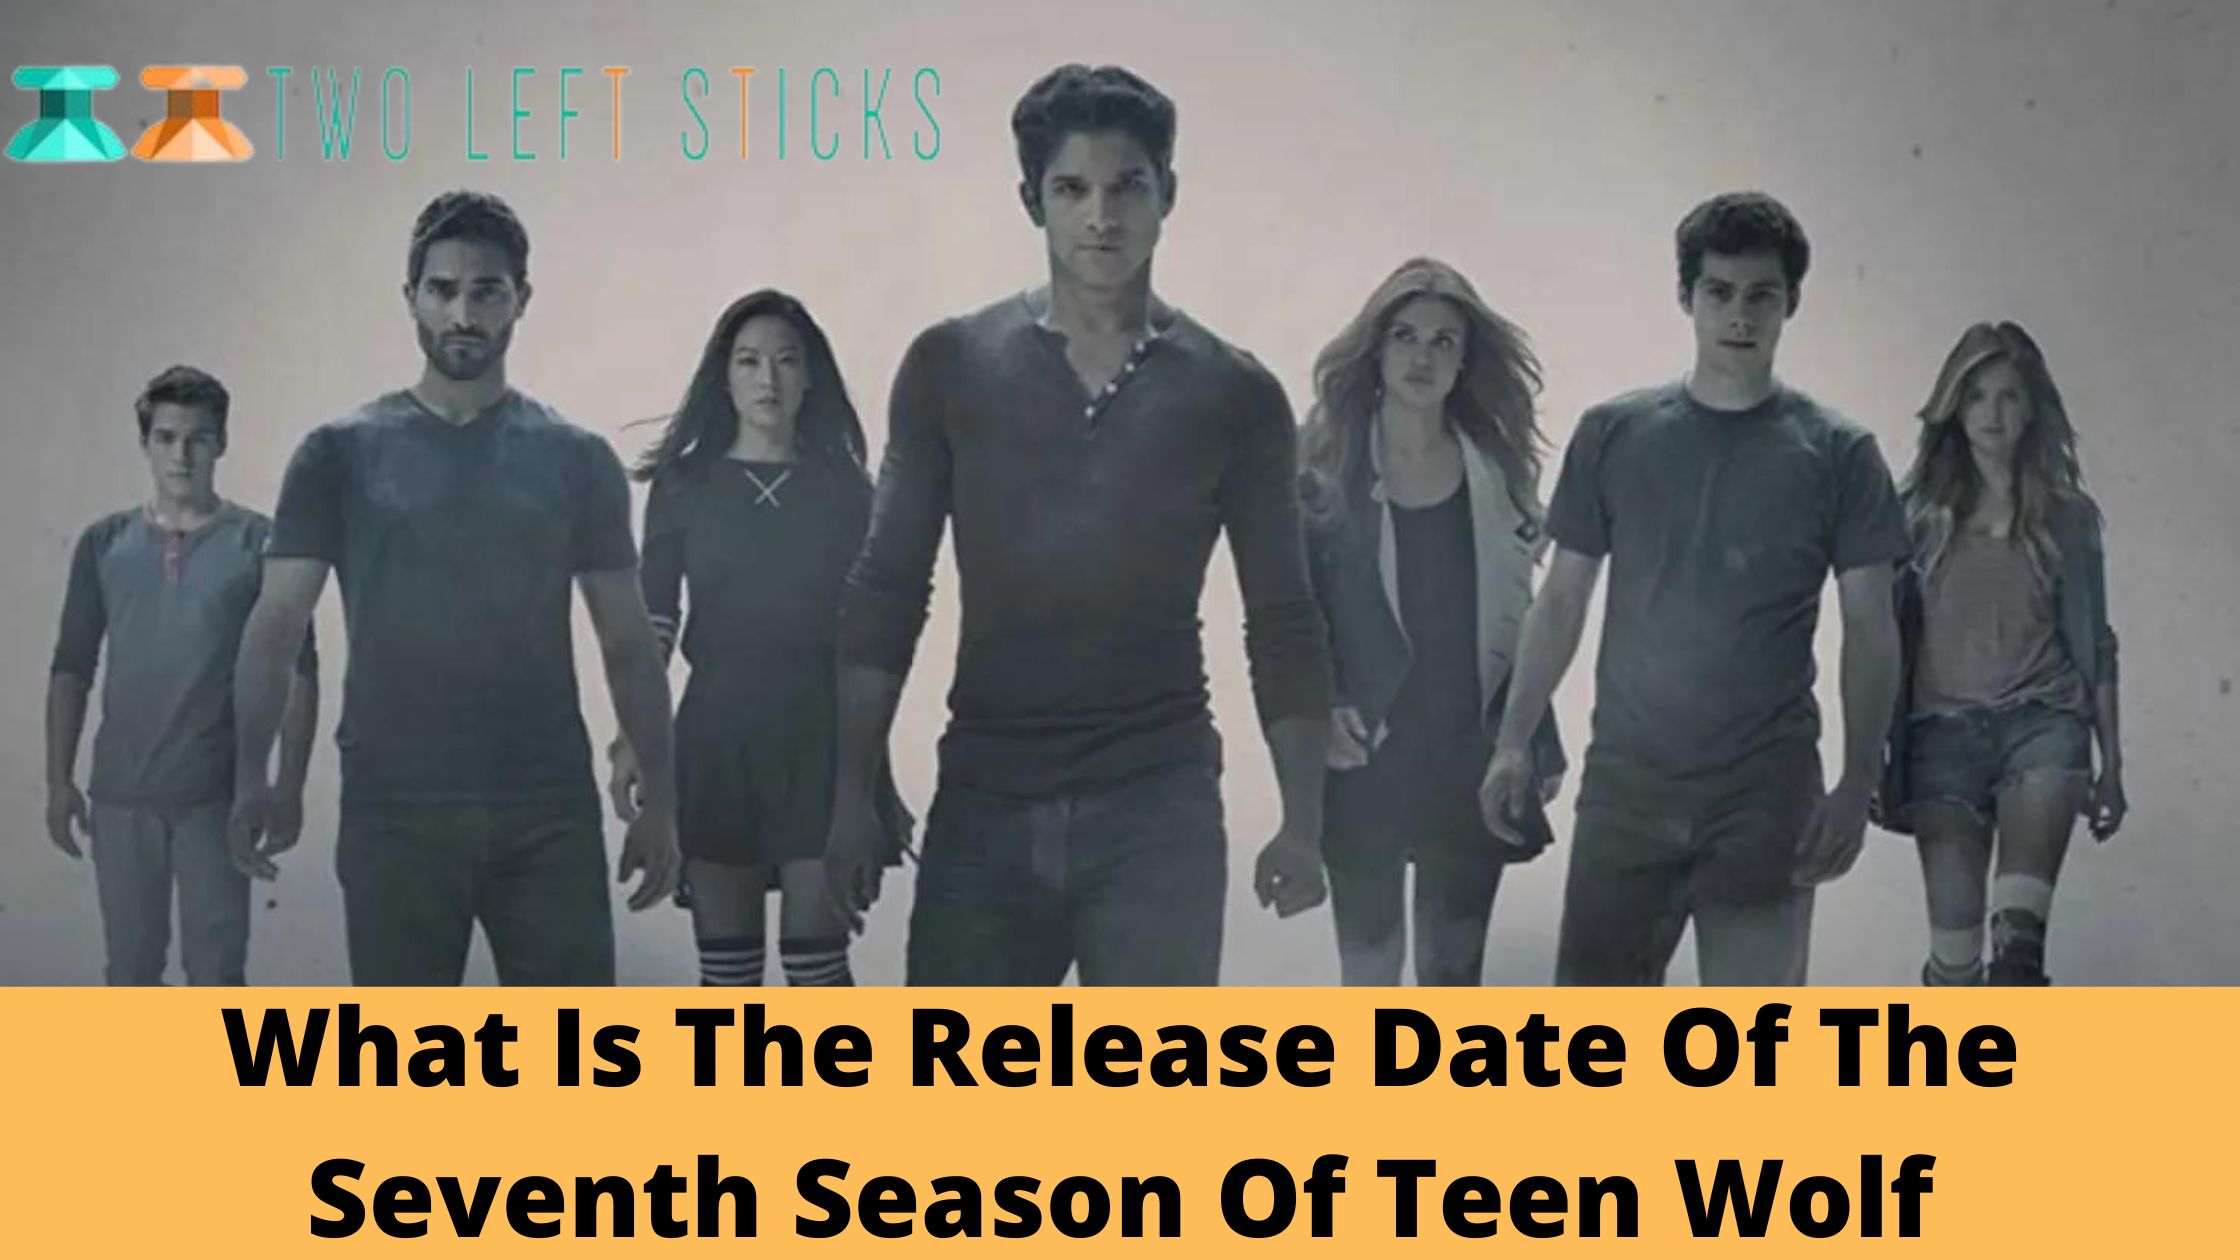 What Is The Release Date Of The Seventh Season Of Teen Wolf-twoleftsticks(1)